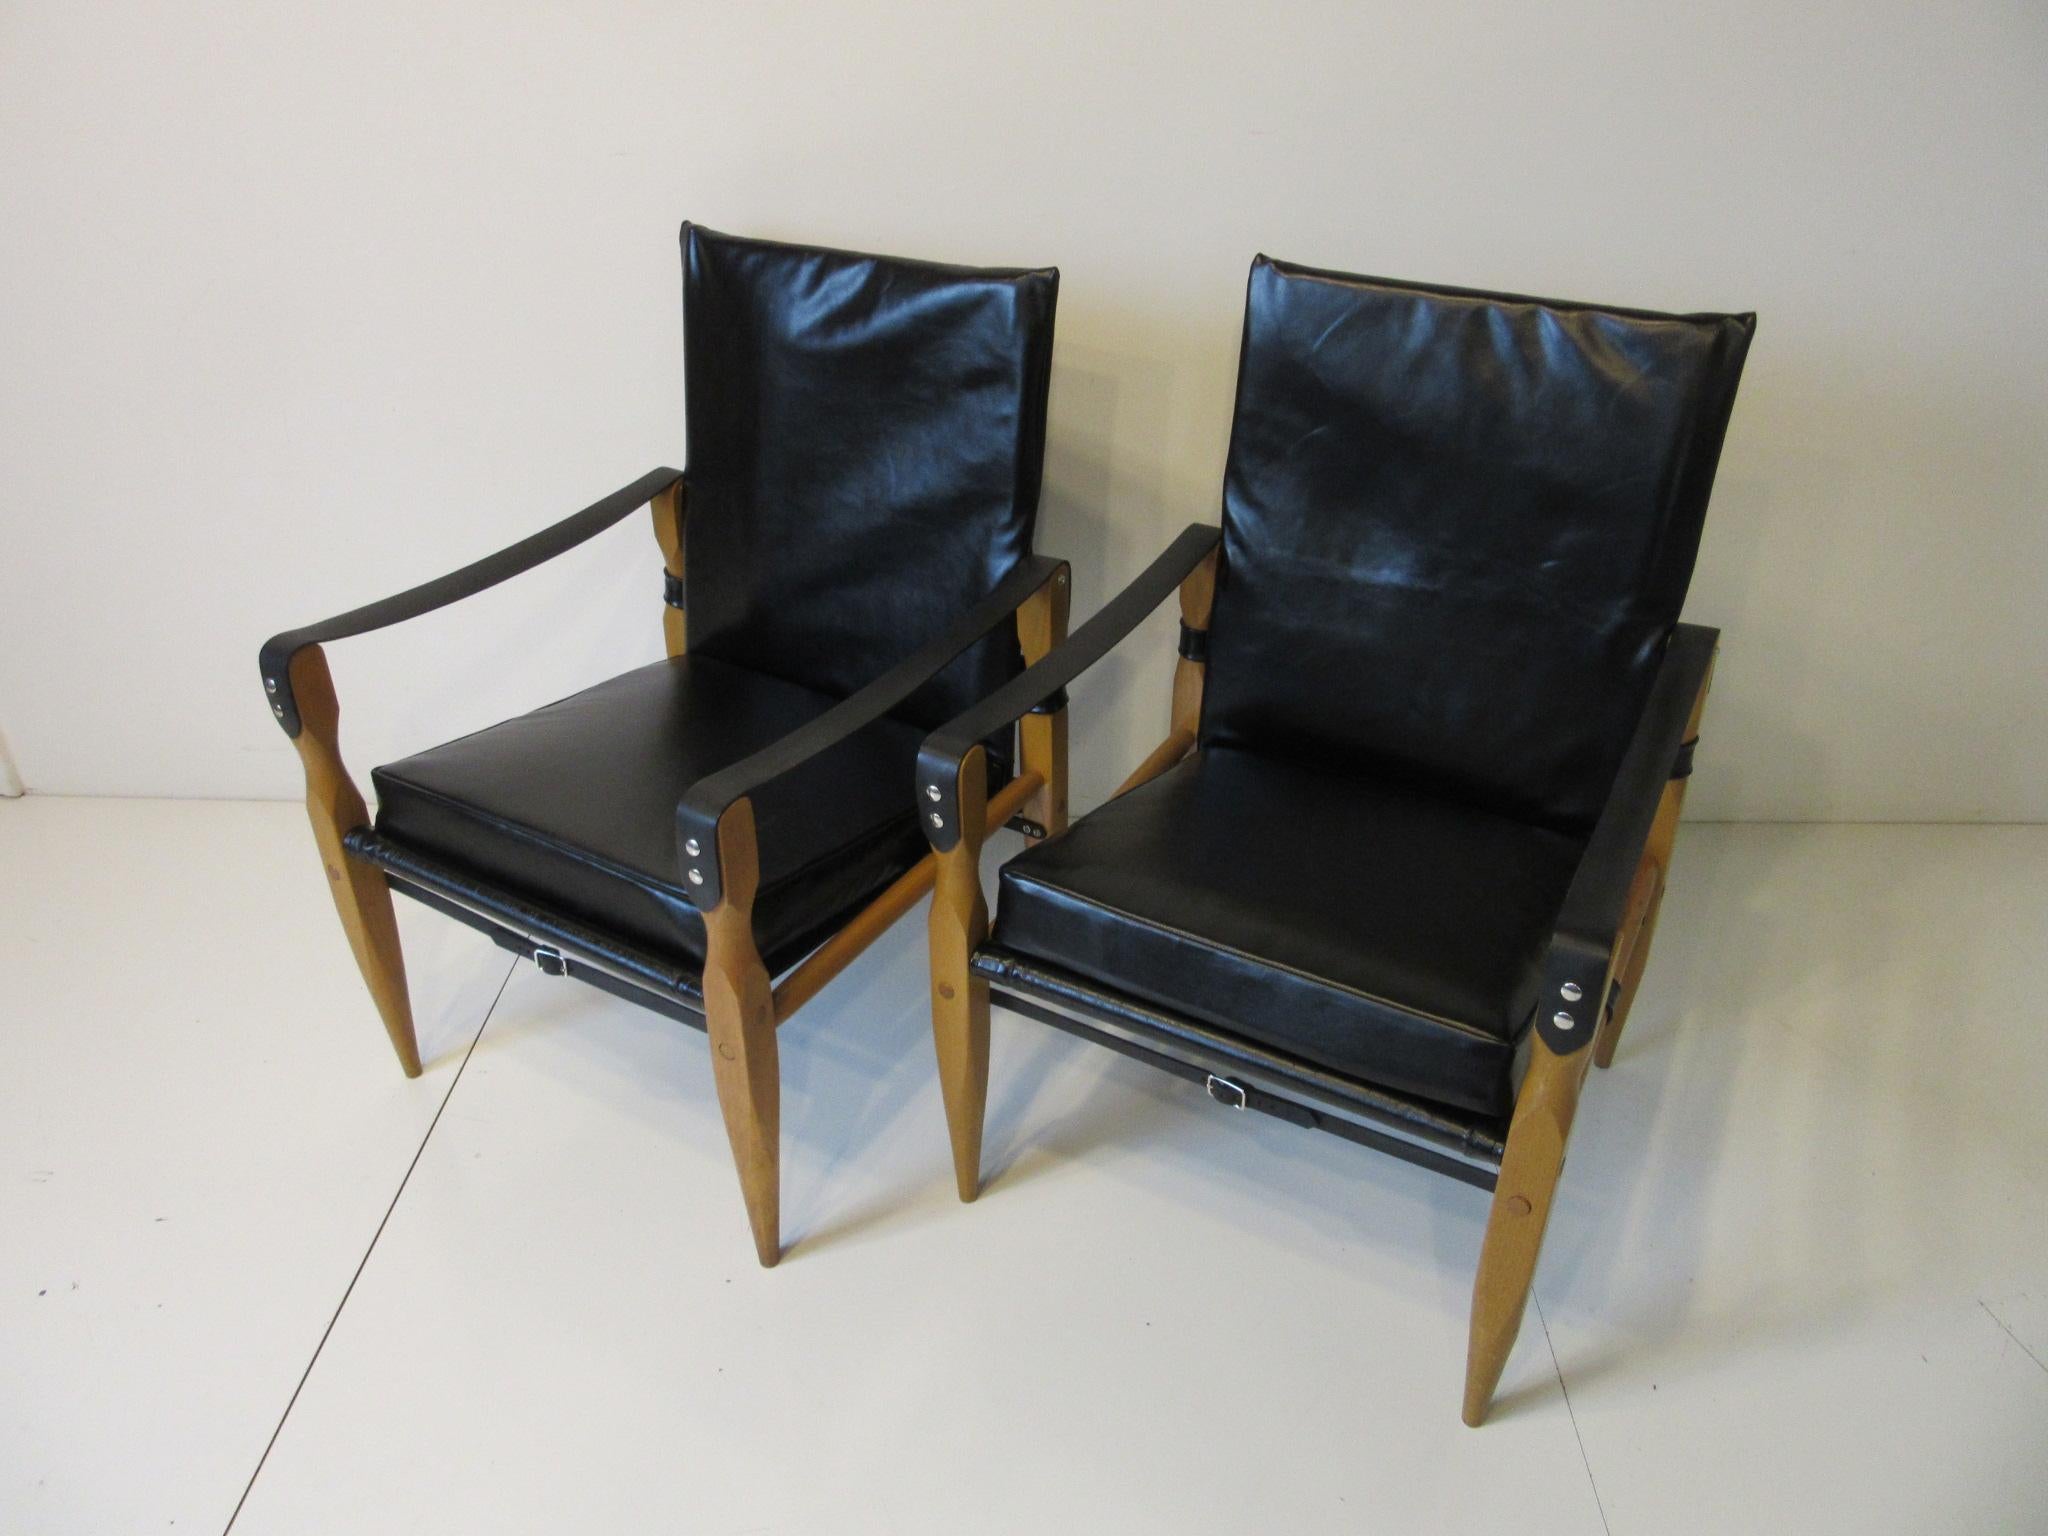 A beautiful pair of comfortable beechwood framed Safari chairs with mat black leather arms and straps with brass buckle detail. The seat back and bottom cushions are in a high sheen soft black leather giving these chair a sophisticated look and